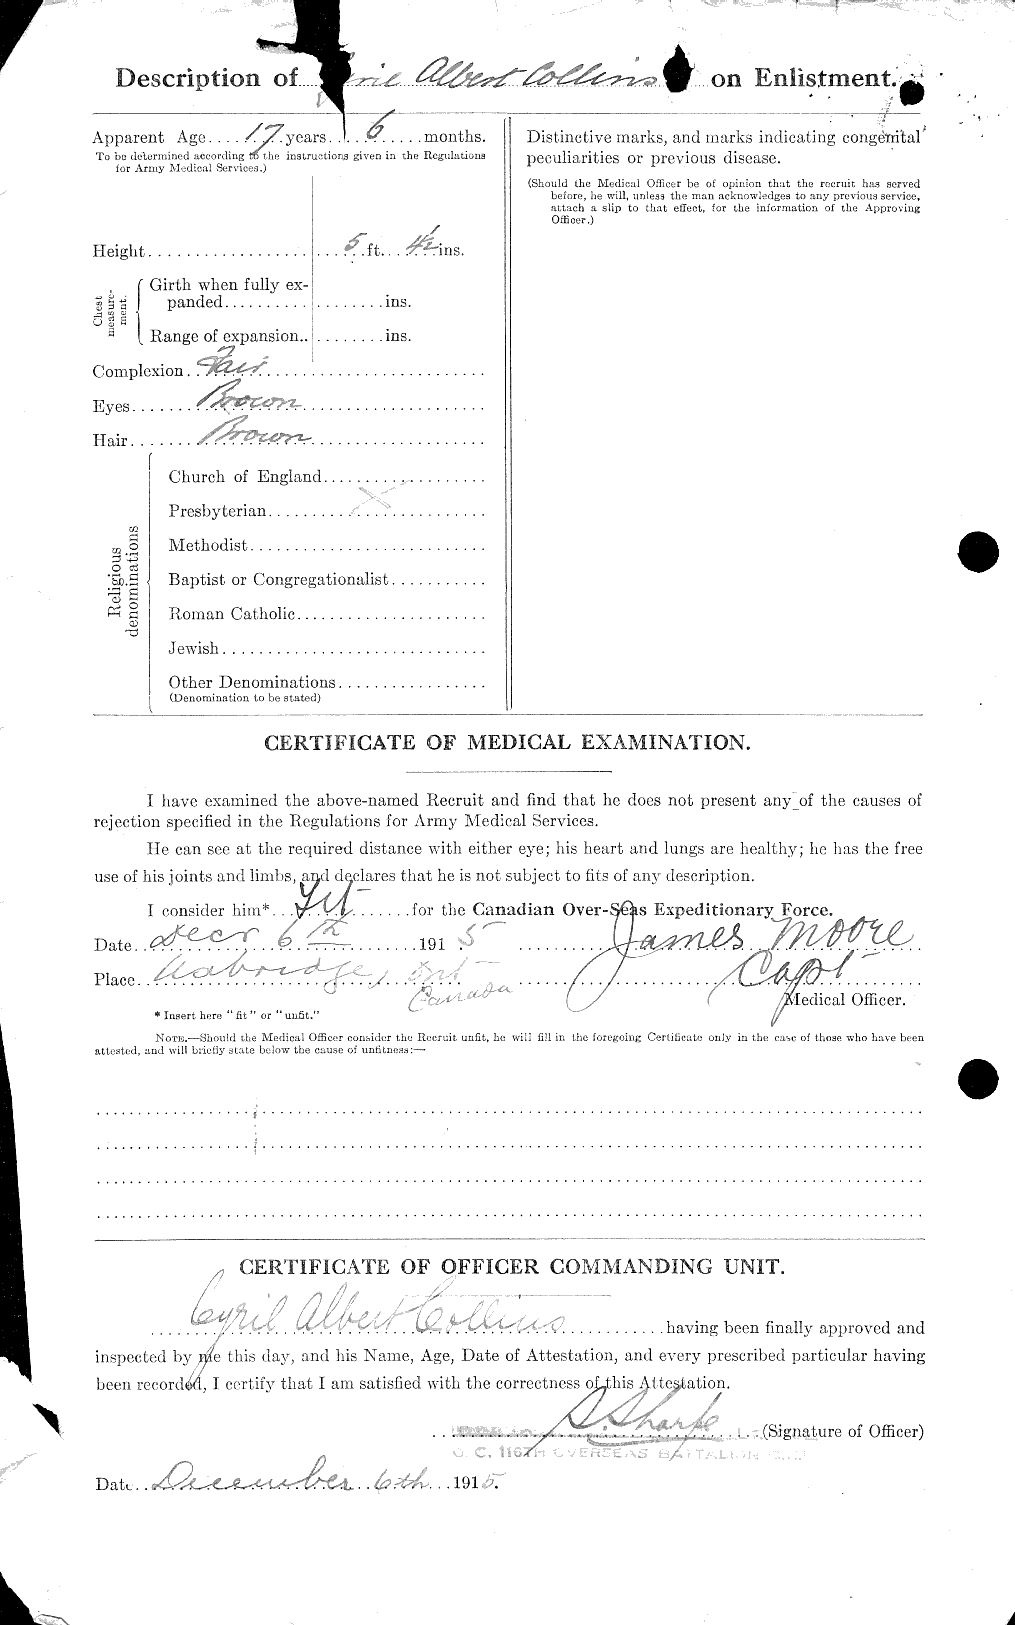 Personnel Records of the First World War - CEF 029060b